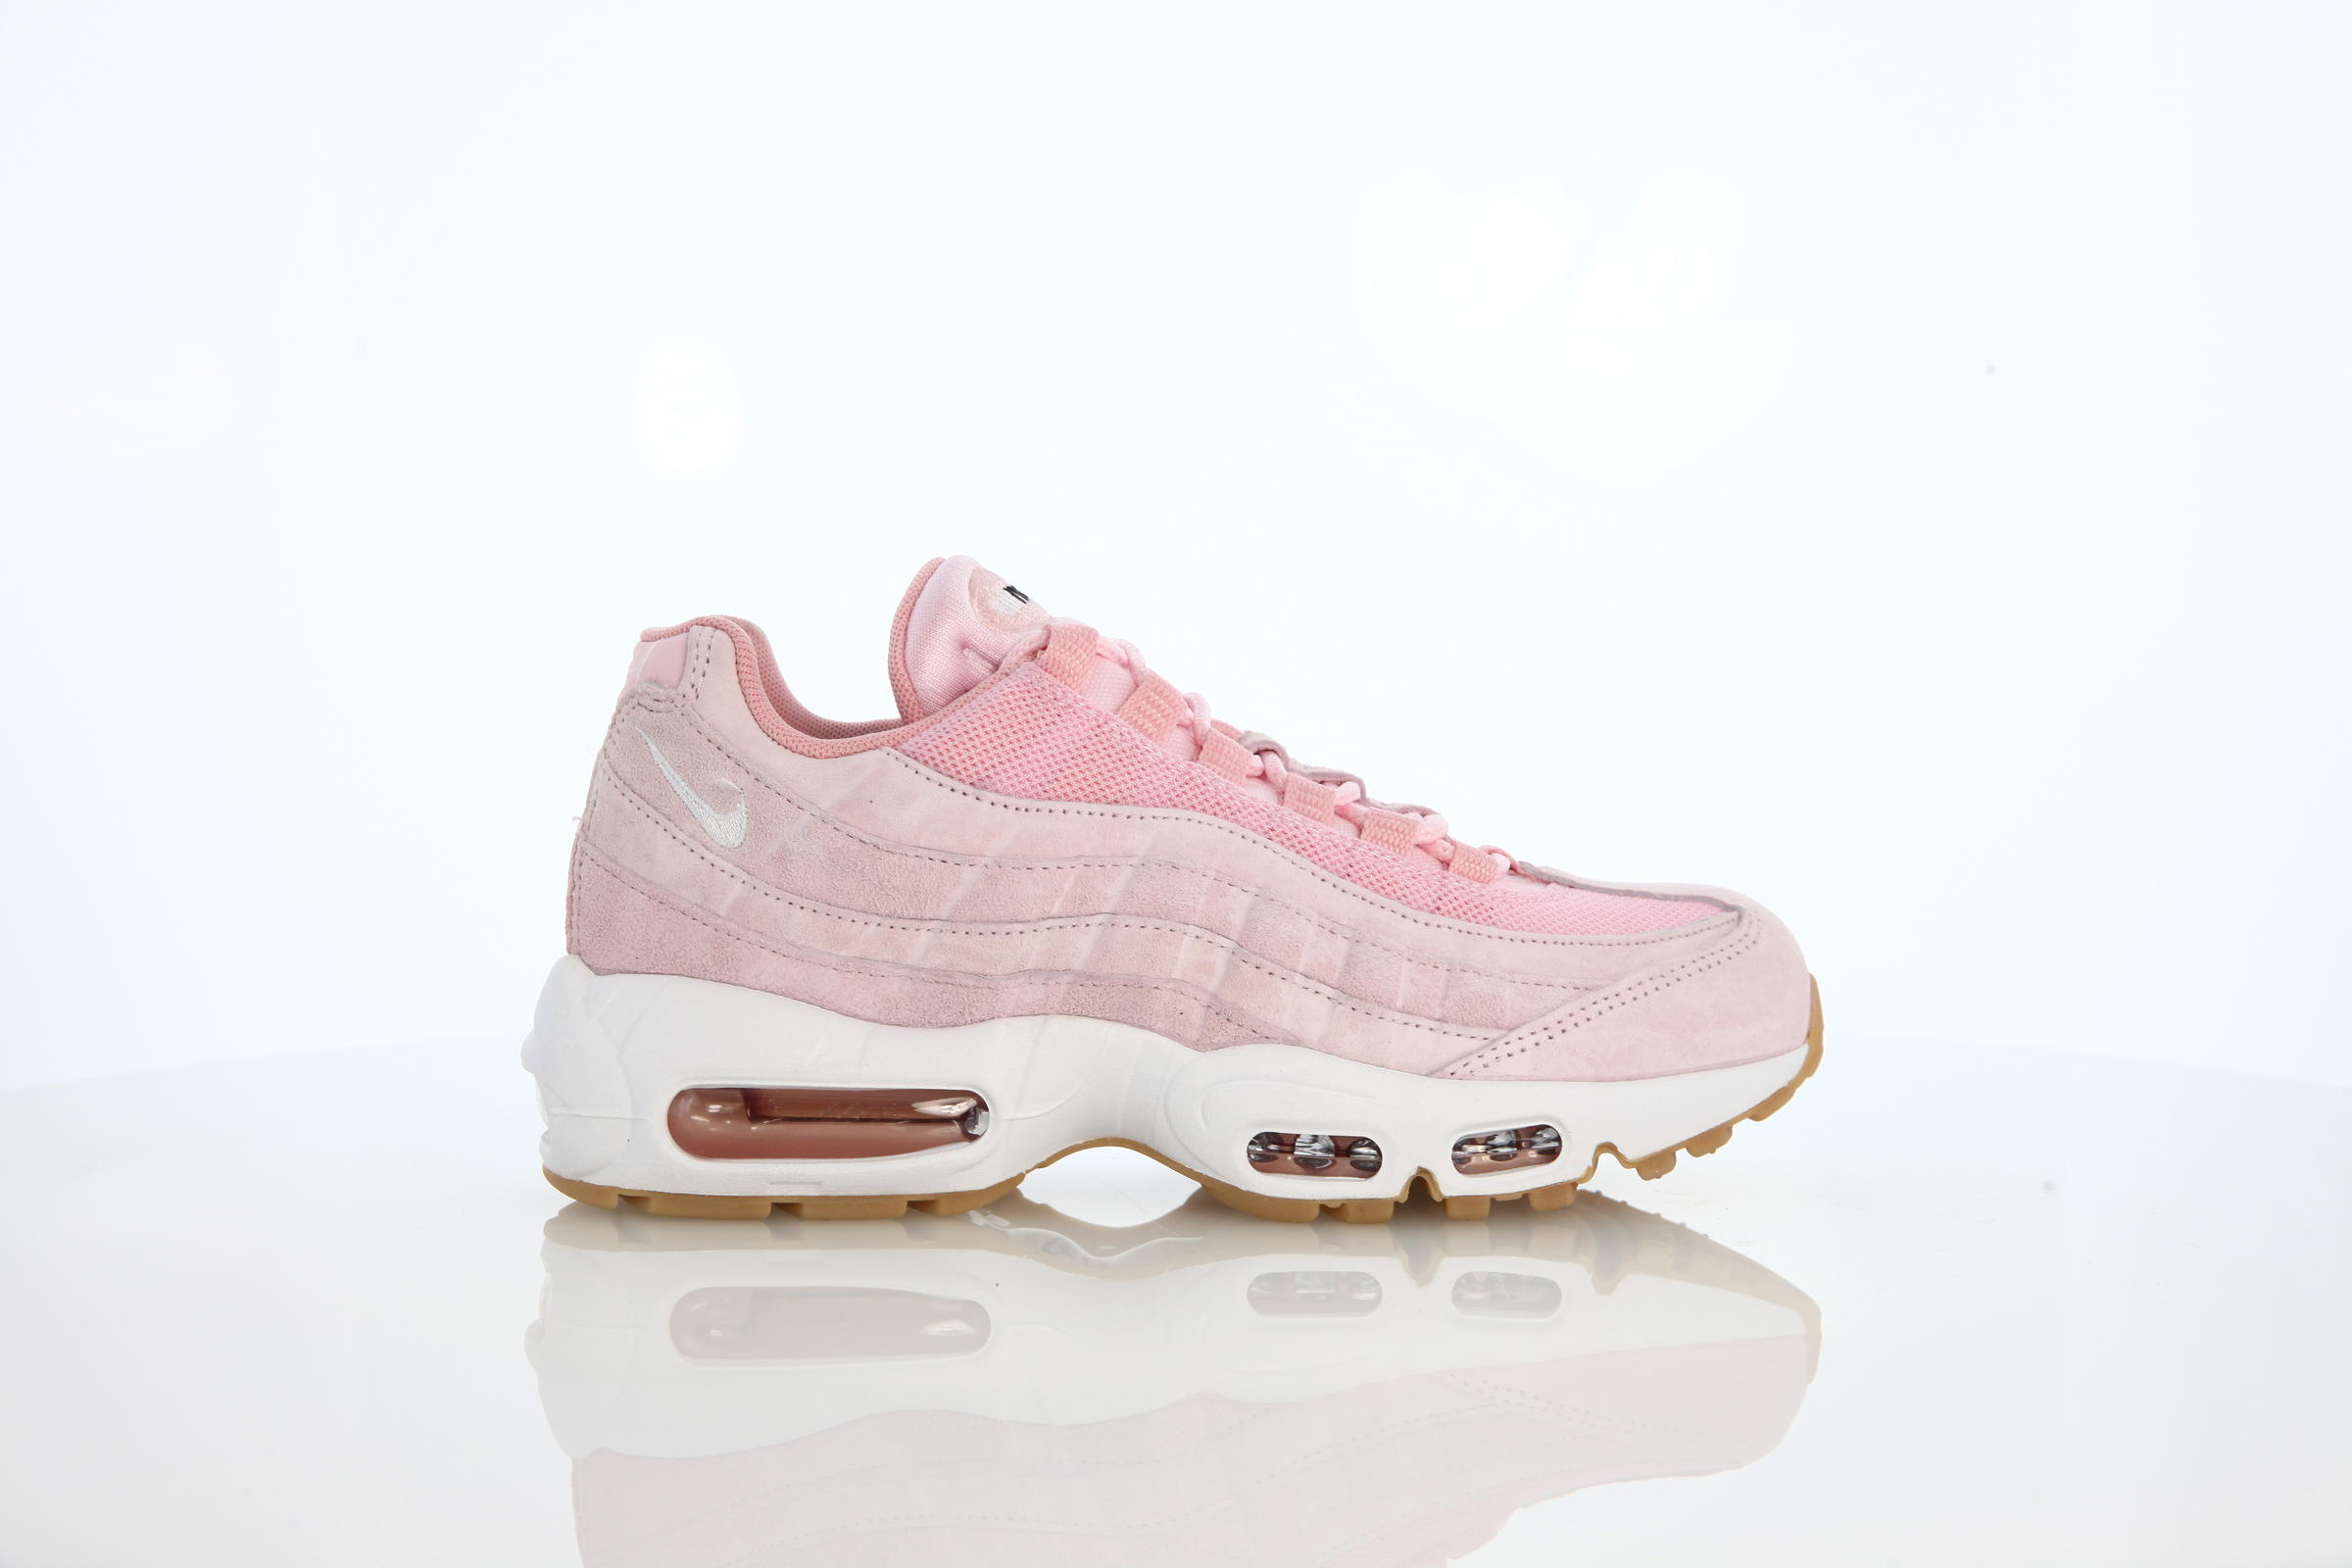 Nike Wmns Air Max 95 Sd "Prism Pink"